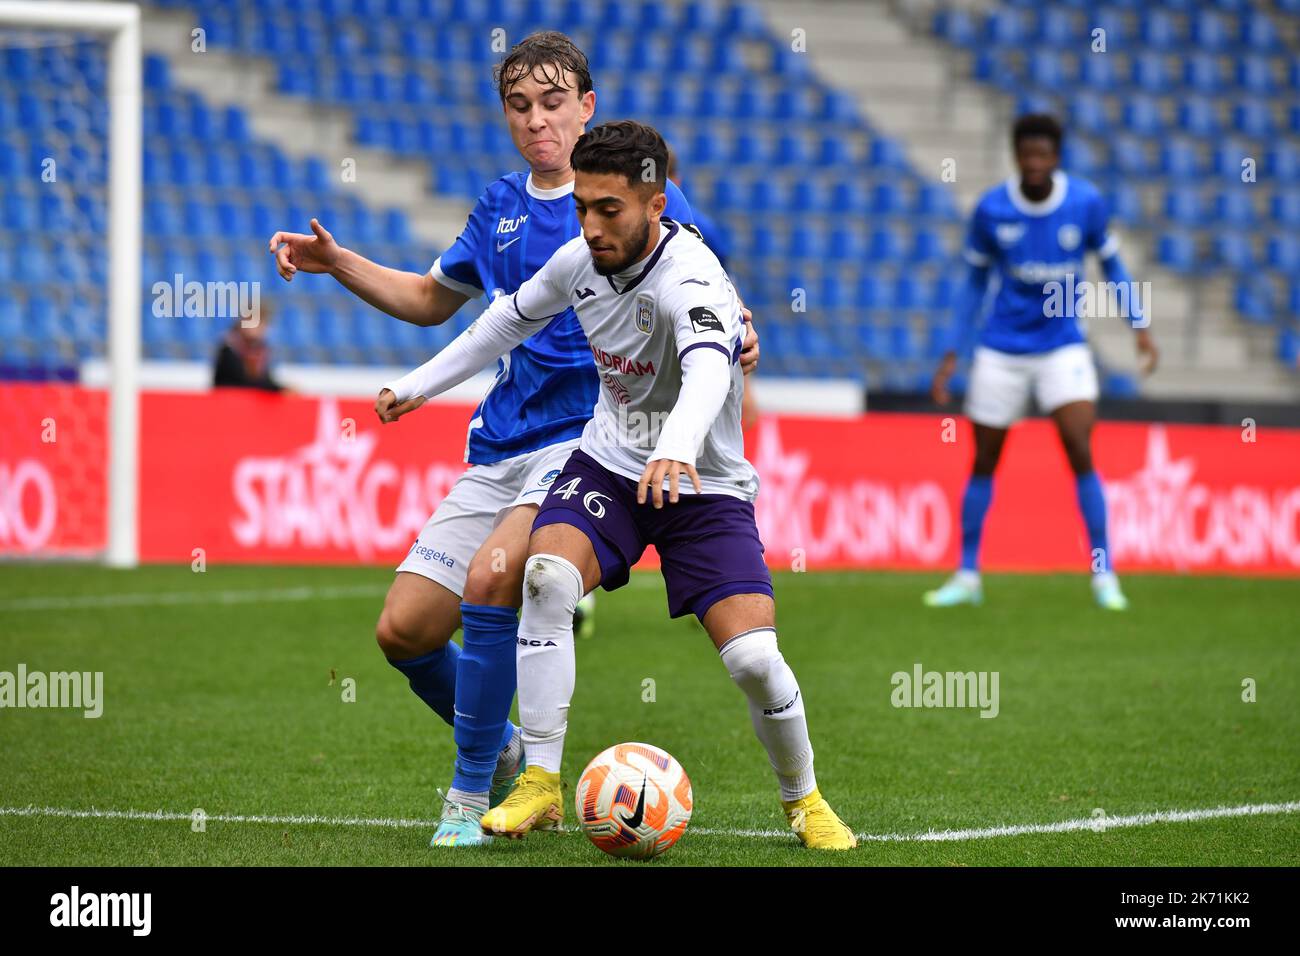 Jong Genk's Kamiel Van de Perre and RSCA Futures' Anouar Ait El Hadj pictured in action during a soccer match between Jong Genk (u23) and RSCA Futures (u23), Sunday 16 October 2022 in Genk, on day 9 of the 2022-2023 'Challenger Pro League' 1B second division of the Belgian championship. BELGA PHOTO JILL DELSAUX Stock Photo